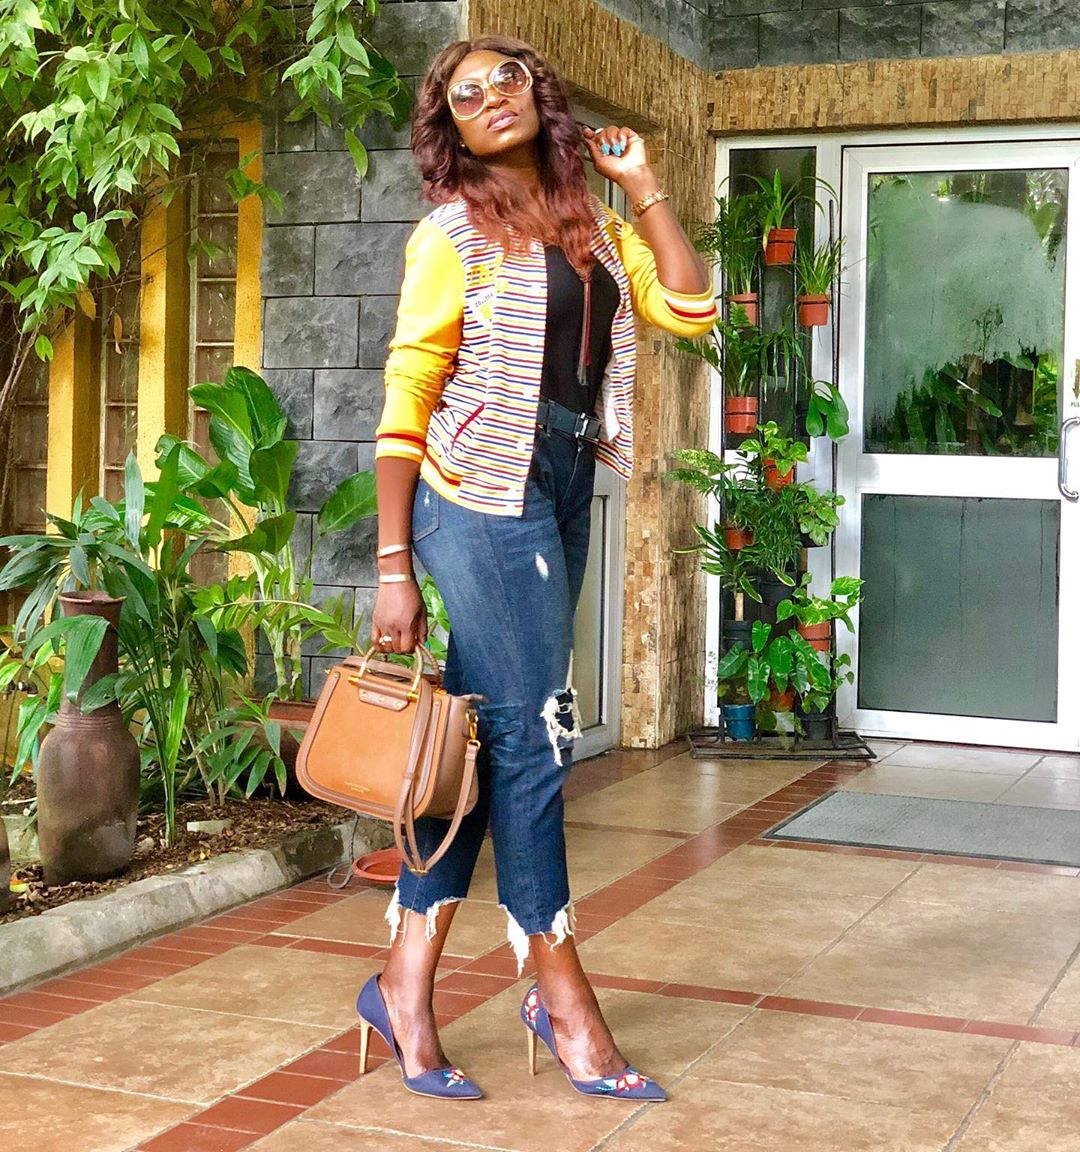 Ufuoma McDermott shows her fashion styles in her outfit